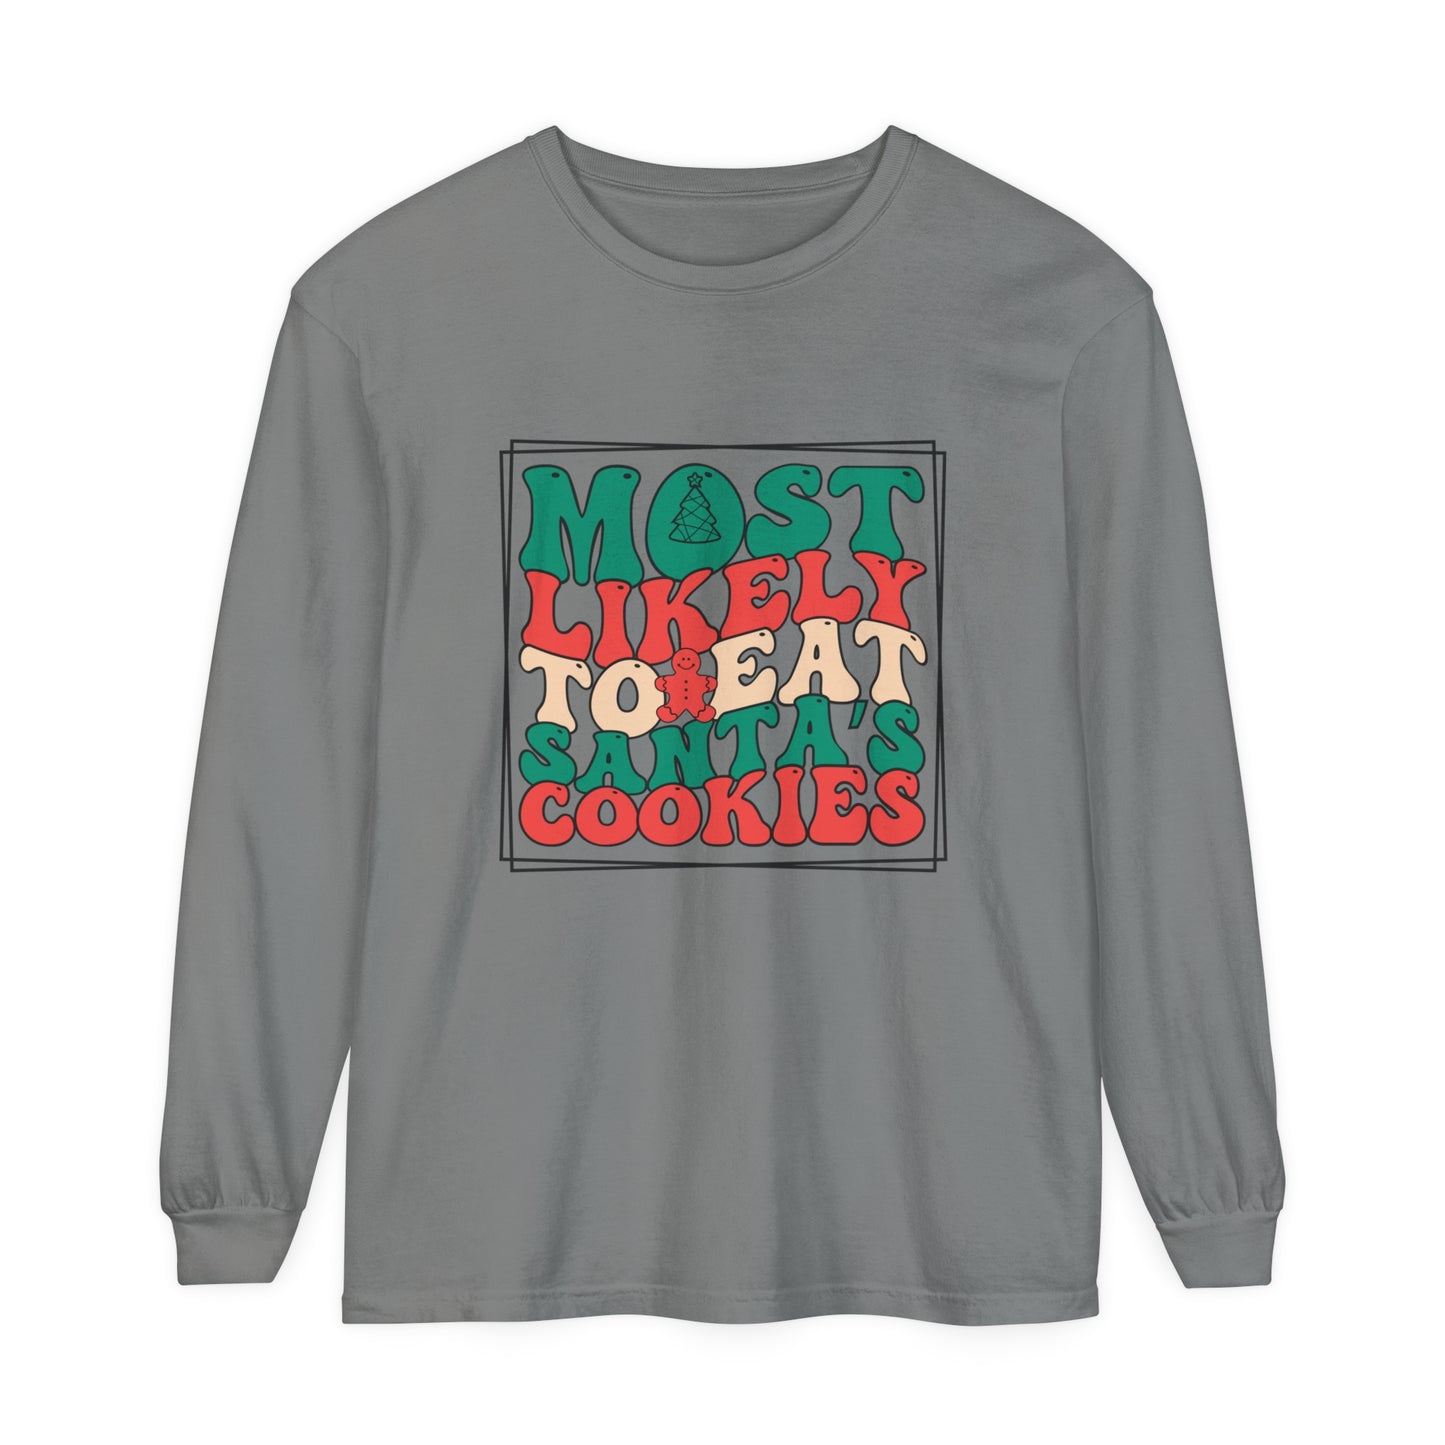 Most Likely To Eat Santa's Cookies Christmas Women's Loose Long Sleeve T-Shirt